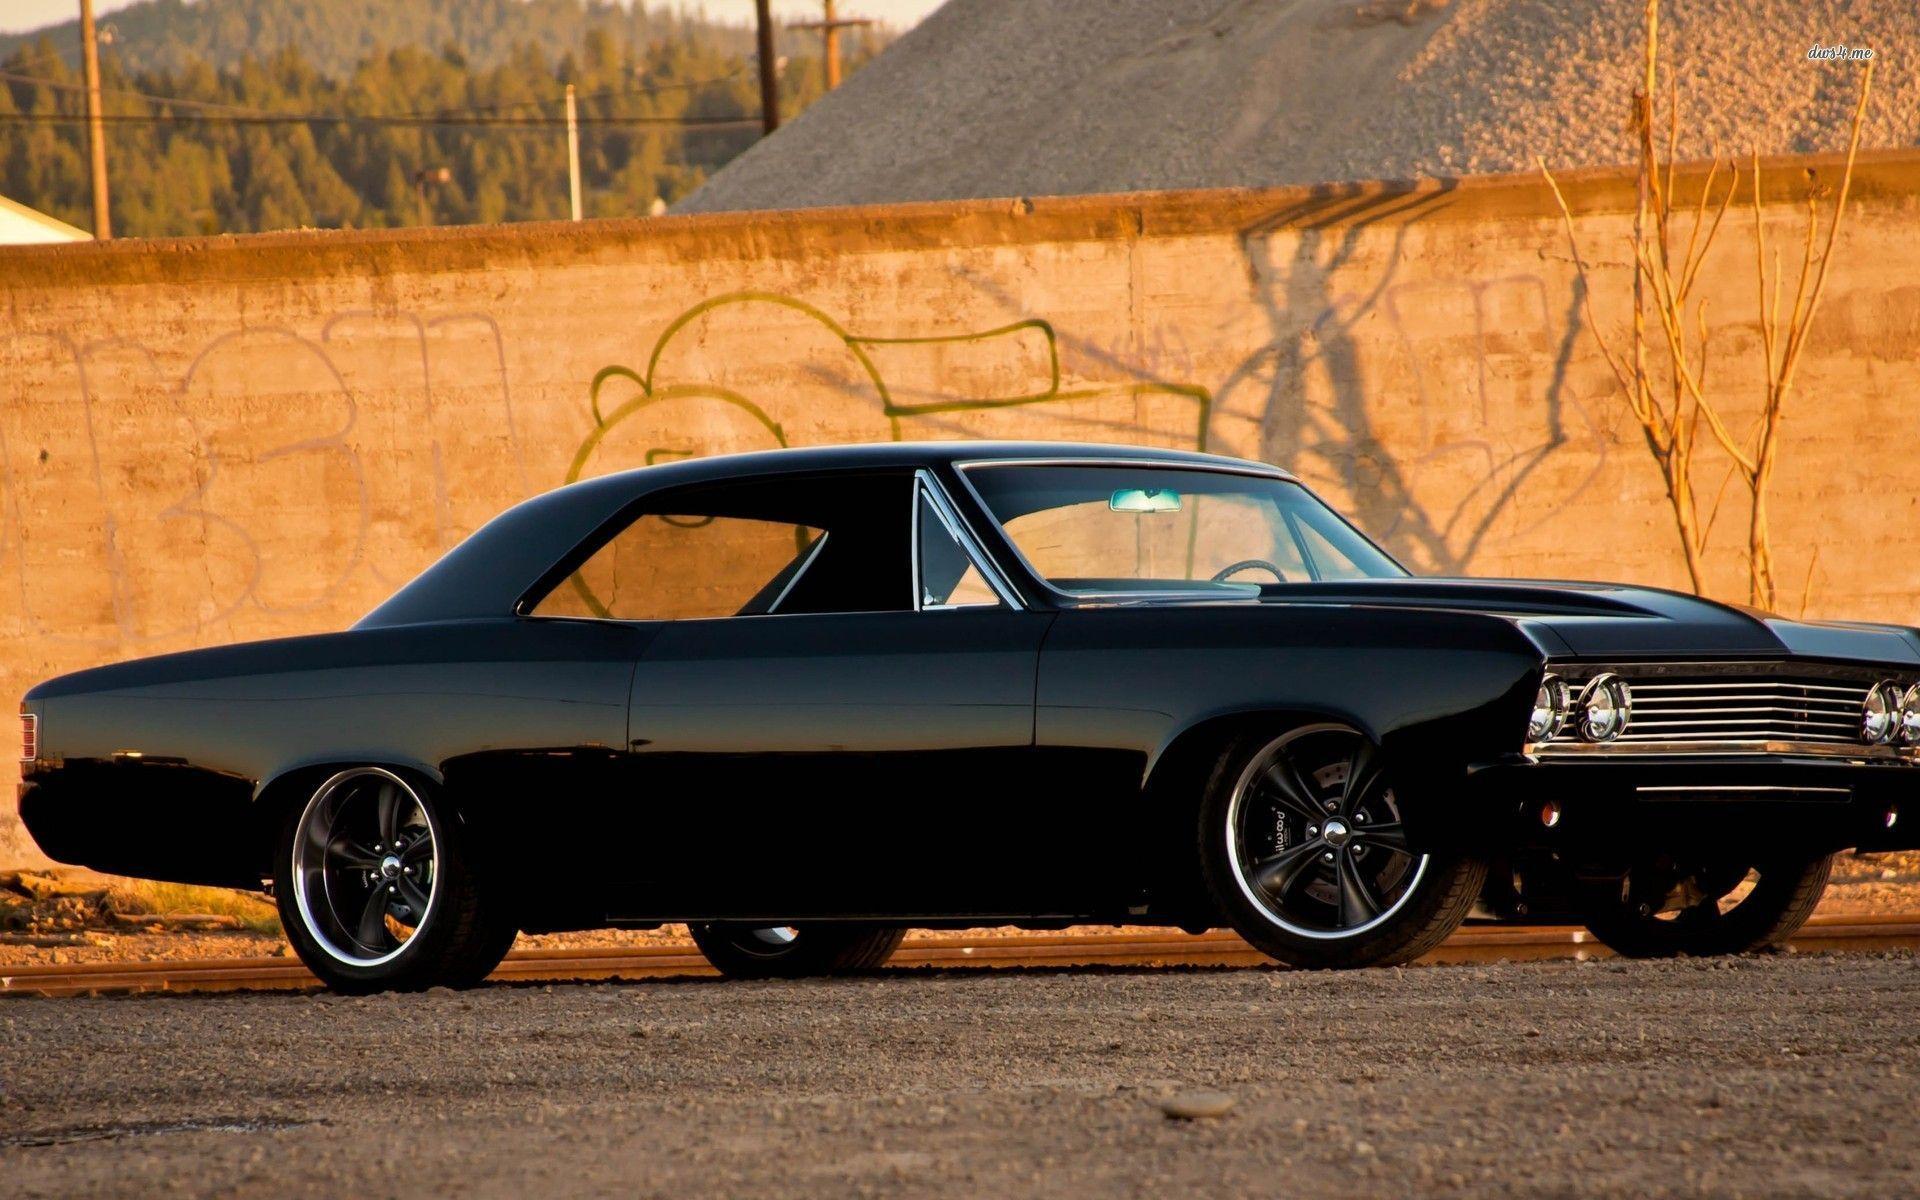 Chevelle SS Wallpapers